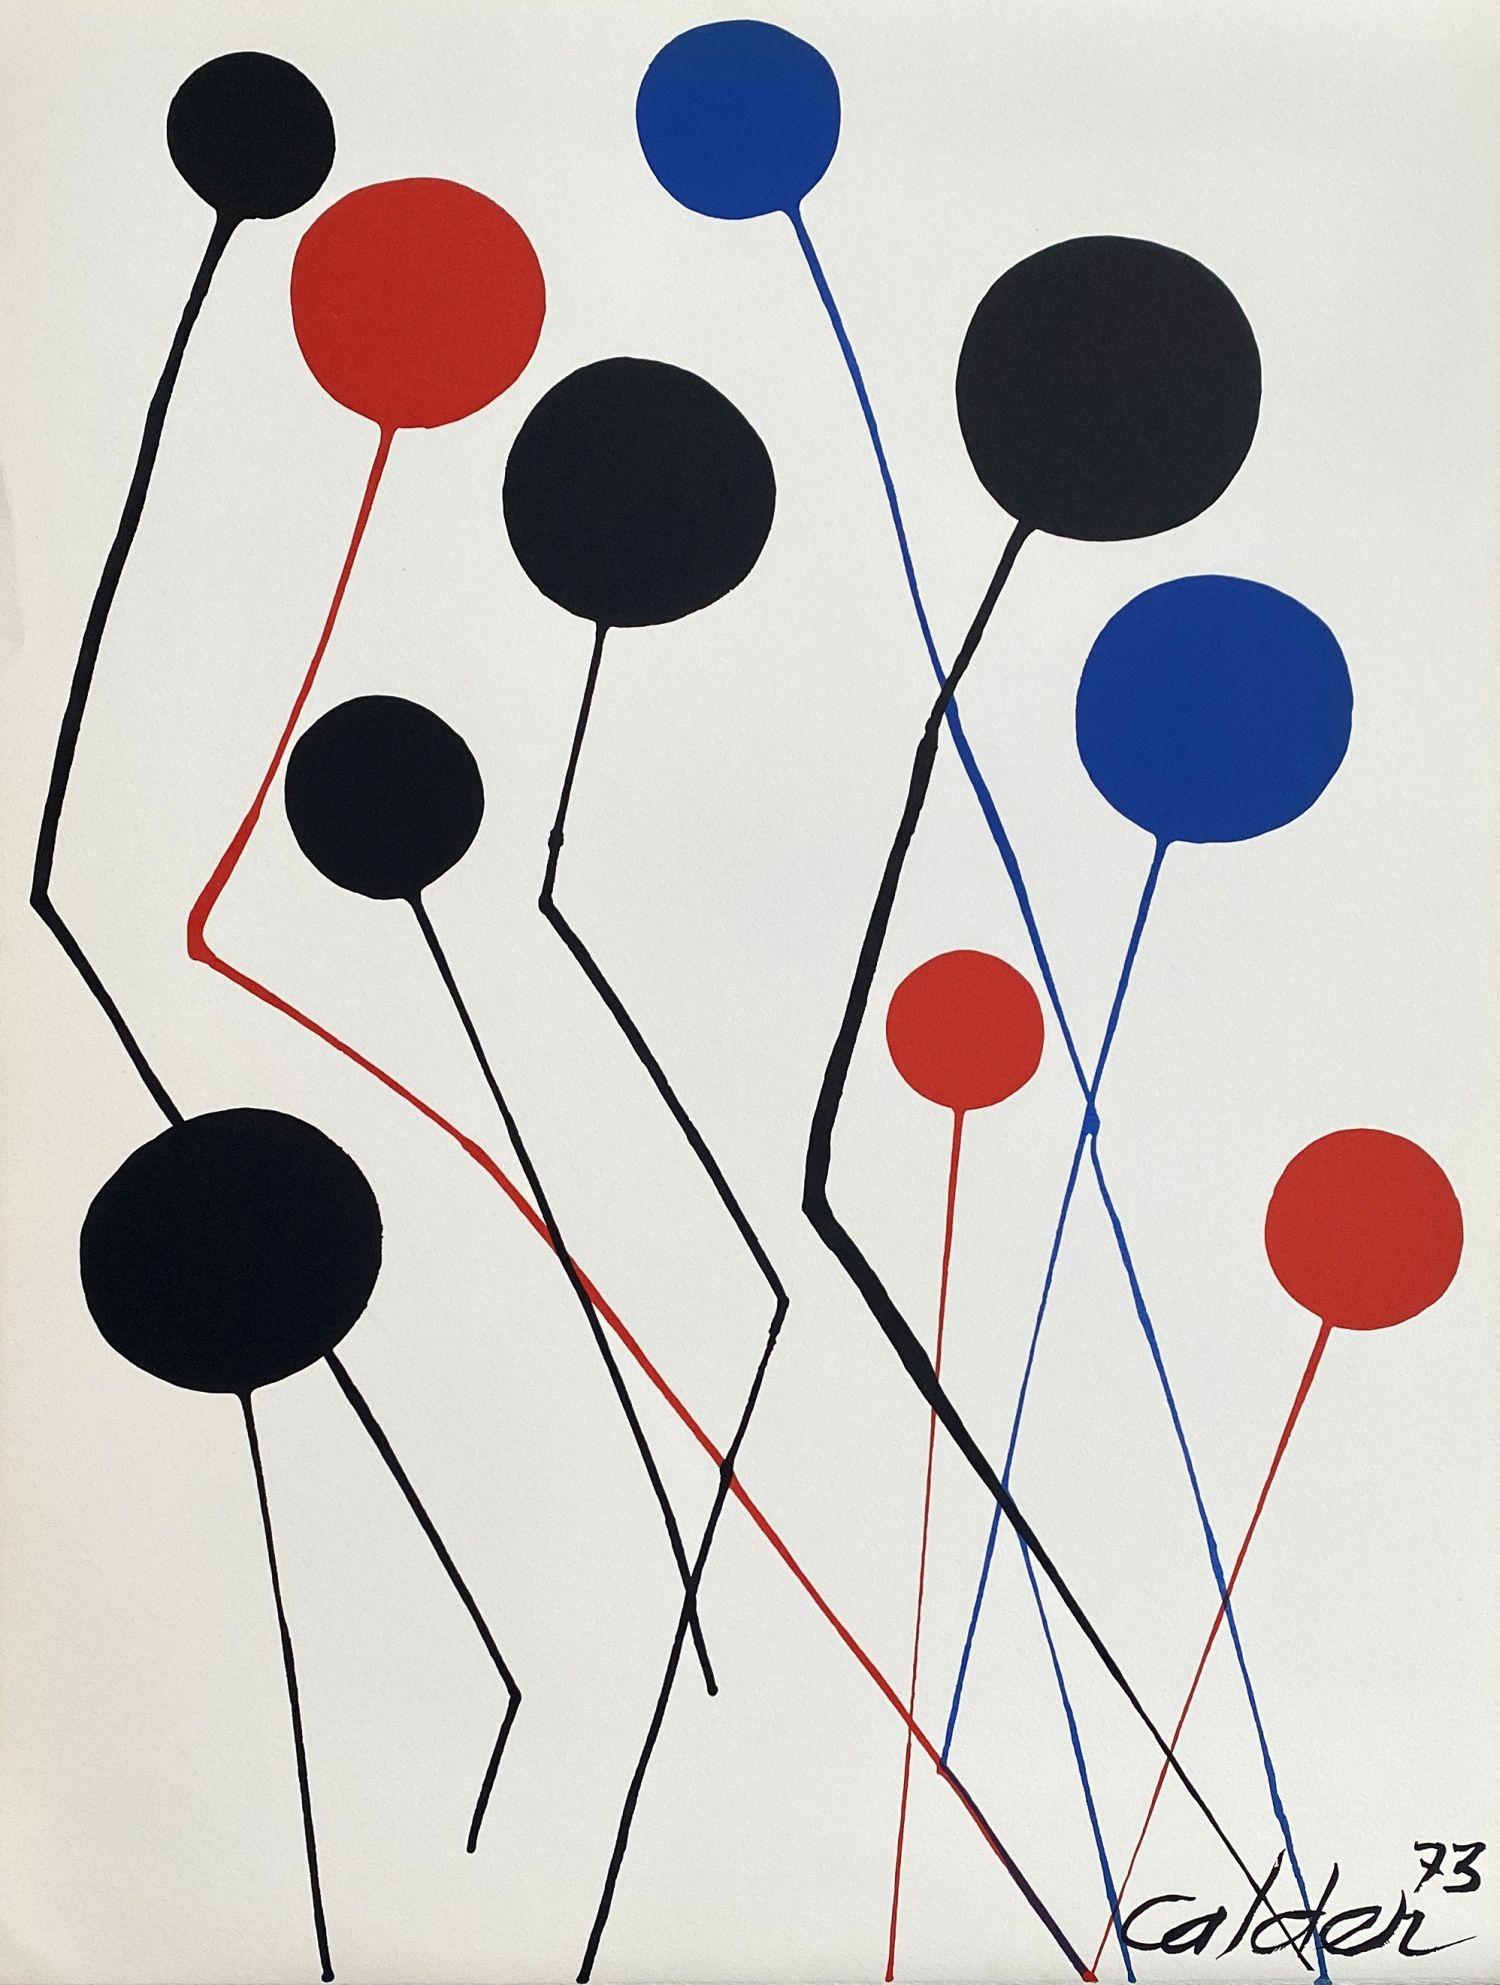 Alexander Calder Abstract Print - Red, Blue & Black Balloons - Original Lithograph Signed in the Plate